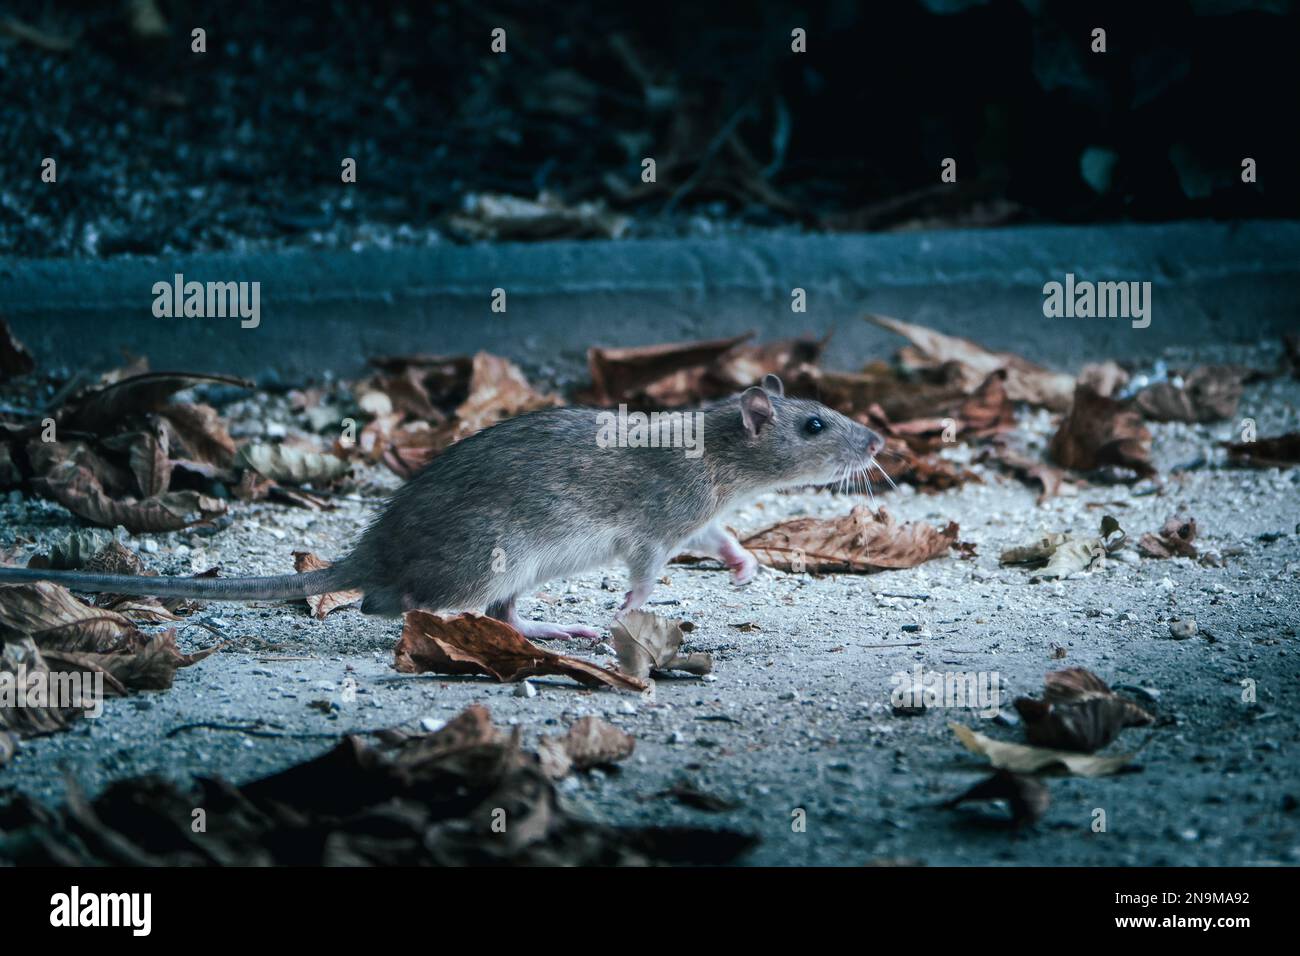 Rat isolated in a park at night Stock Photo